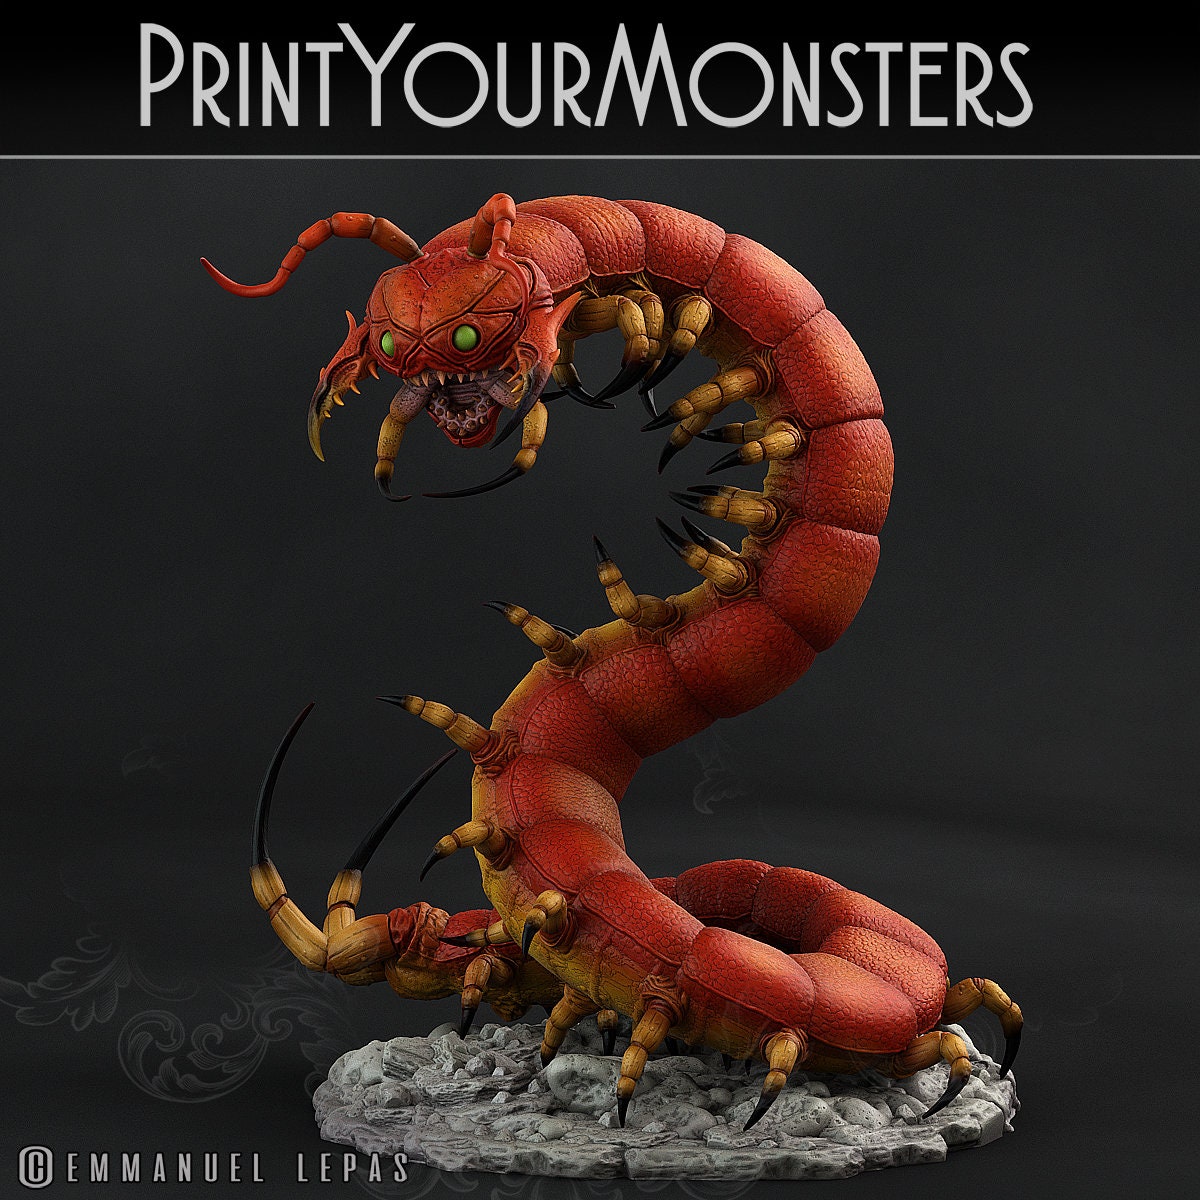 Giant Centipede - Print Your Monsters 